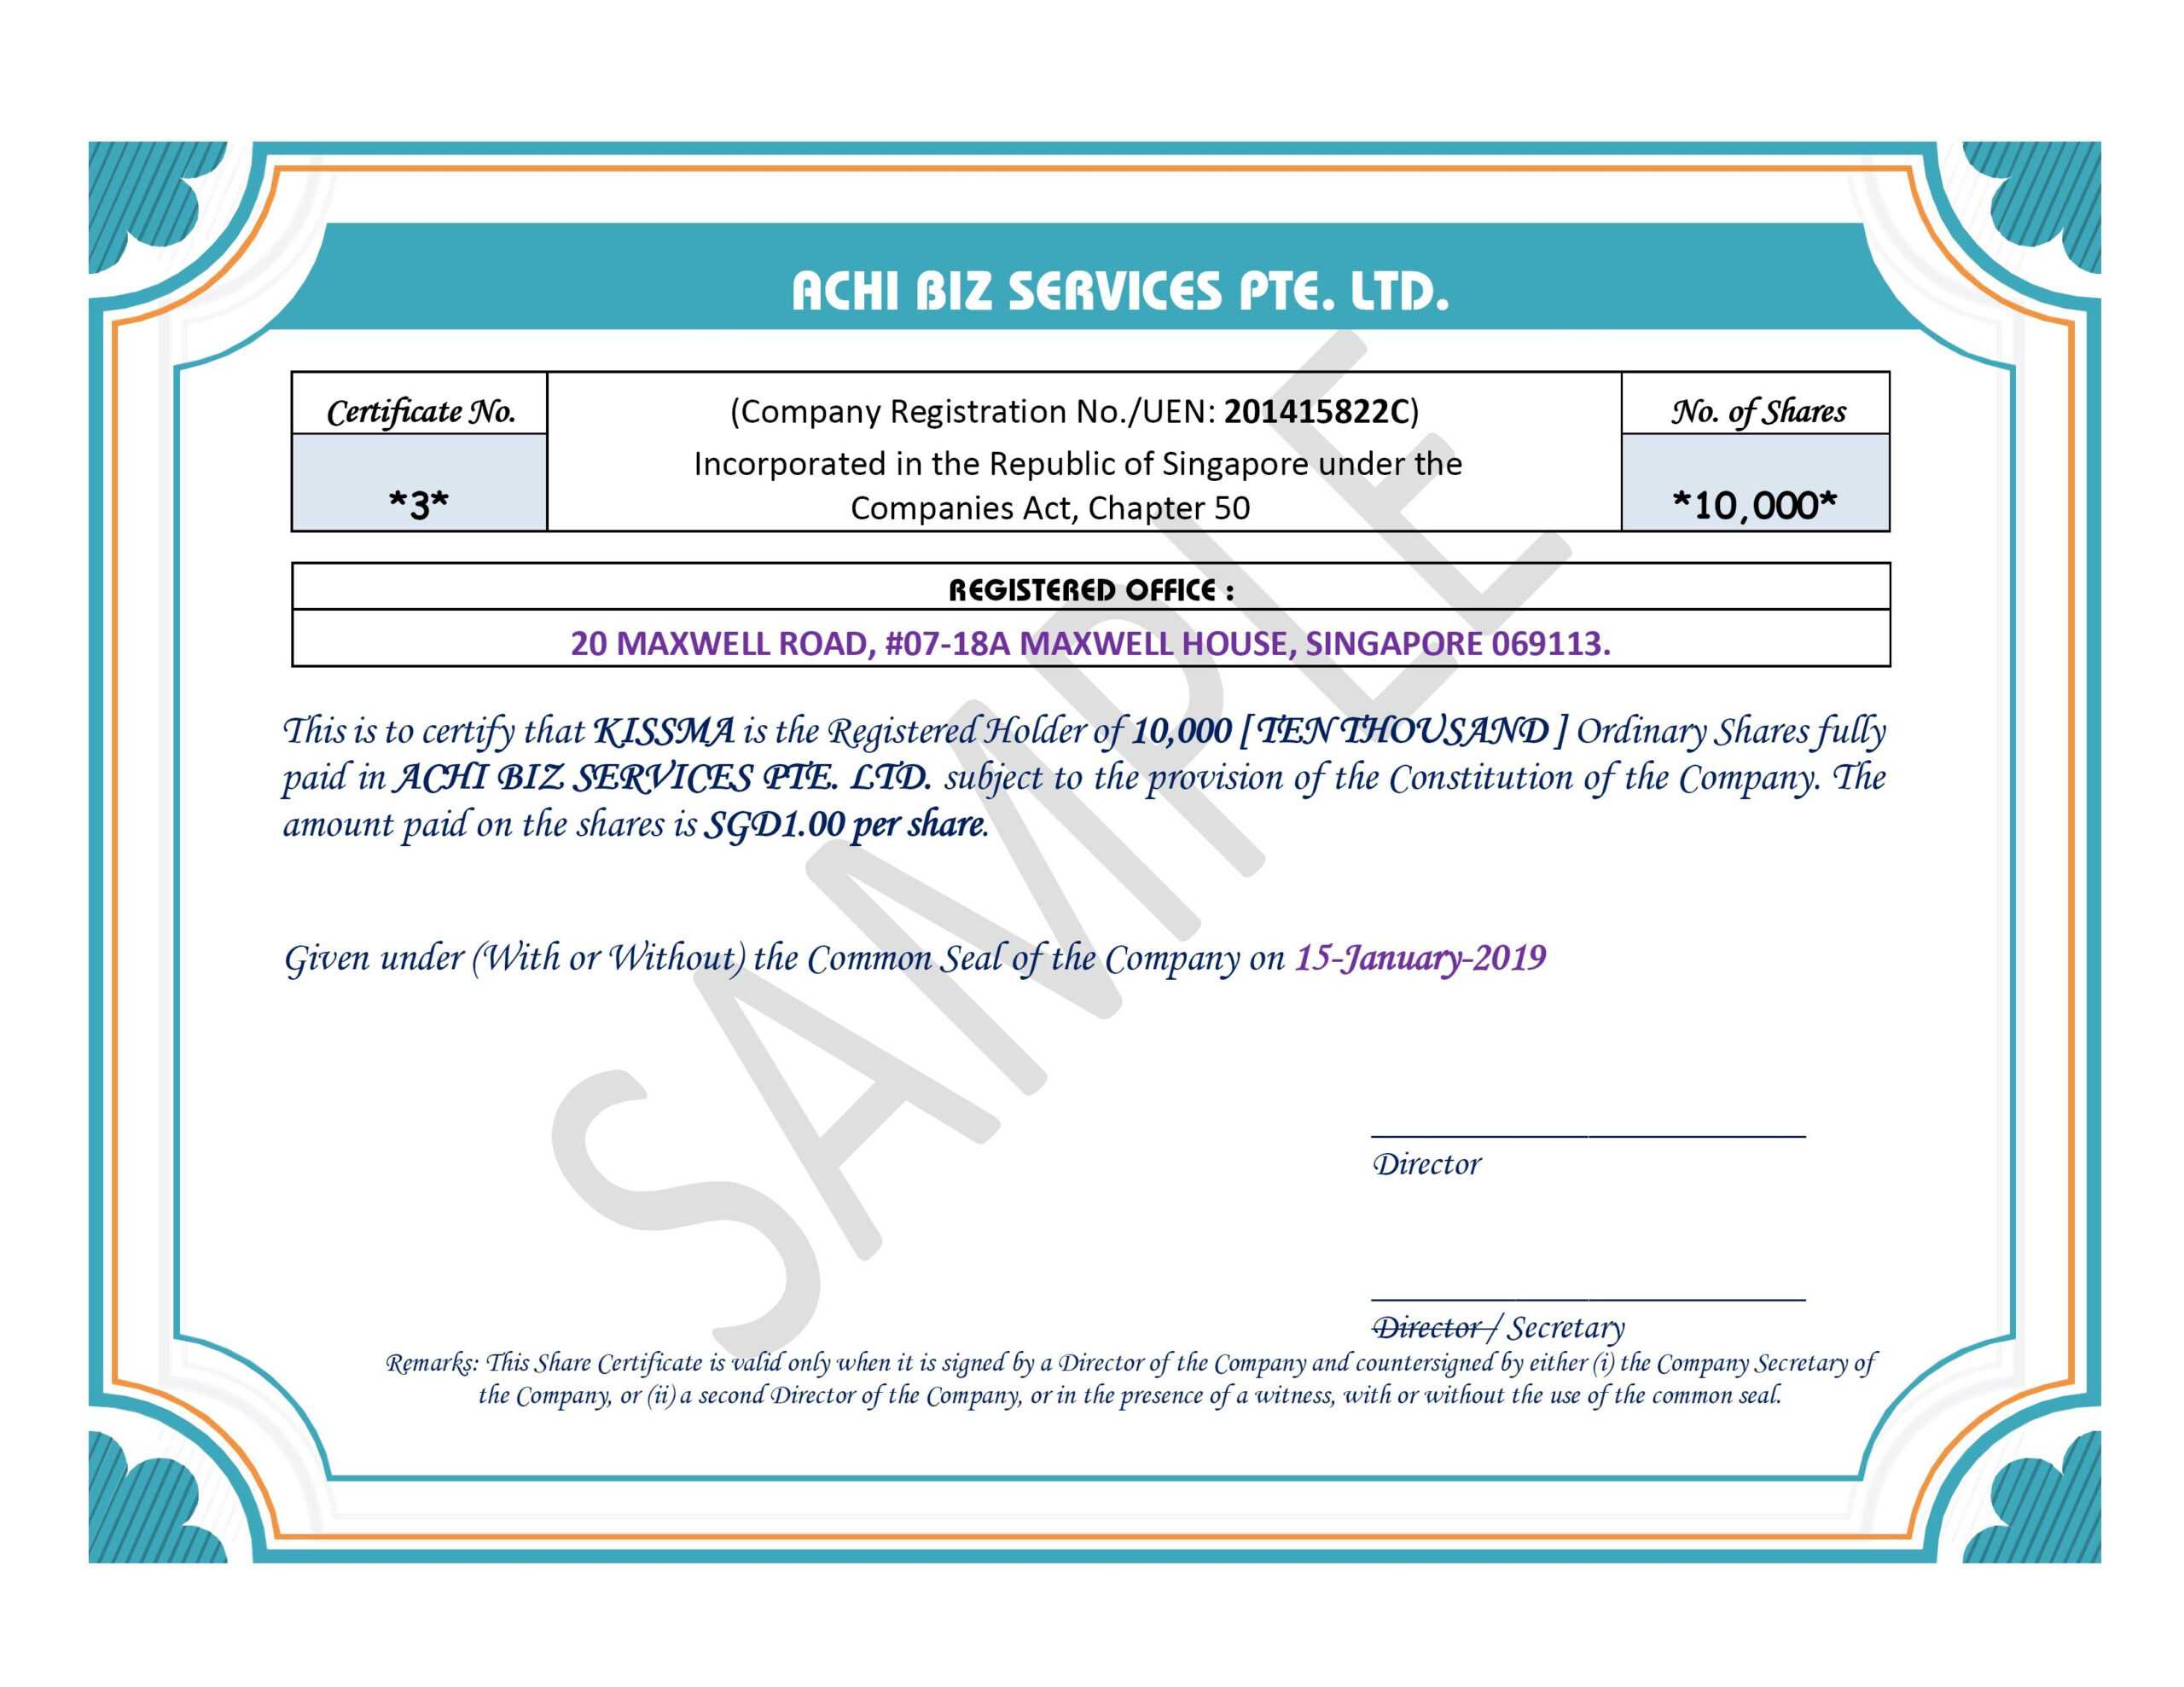 Share Certificate In Singapore ~ Achibiz Pertaining To Share Certificate Template Companies House